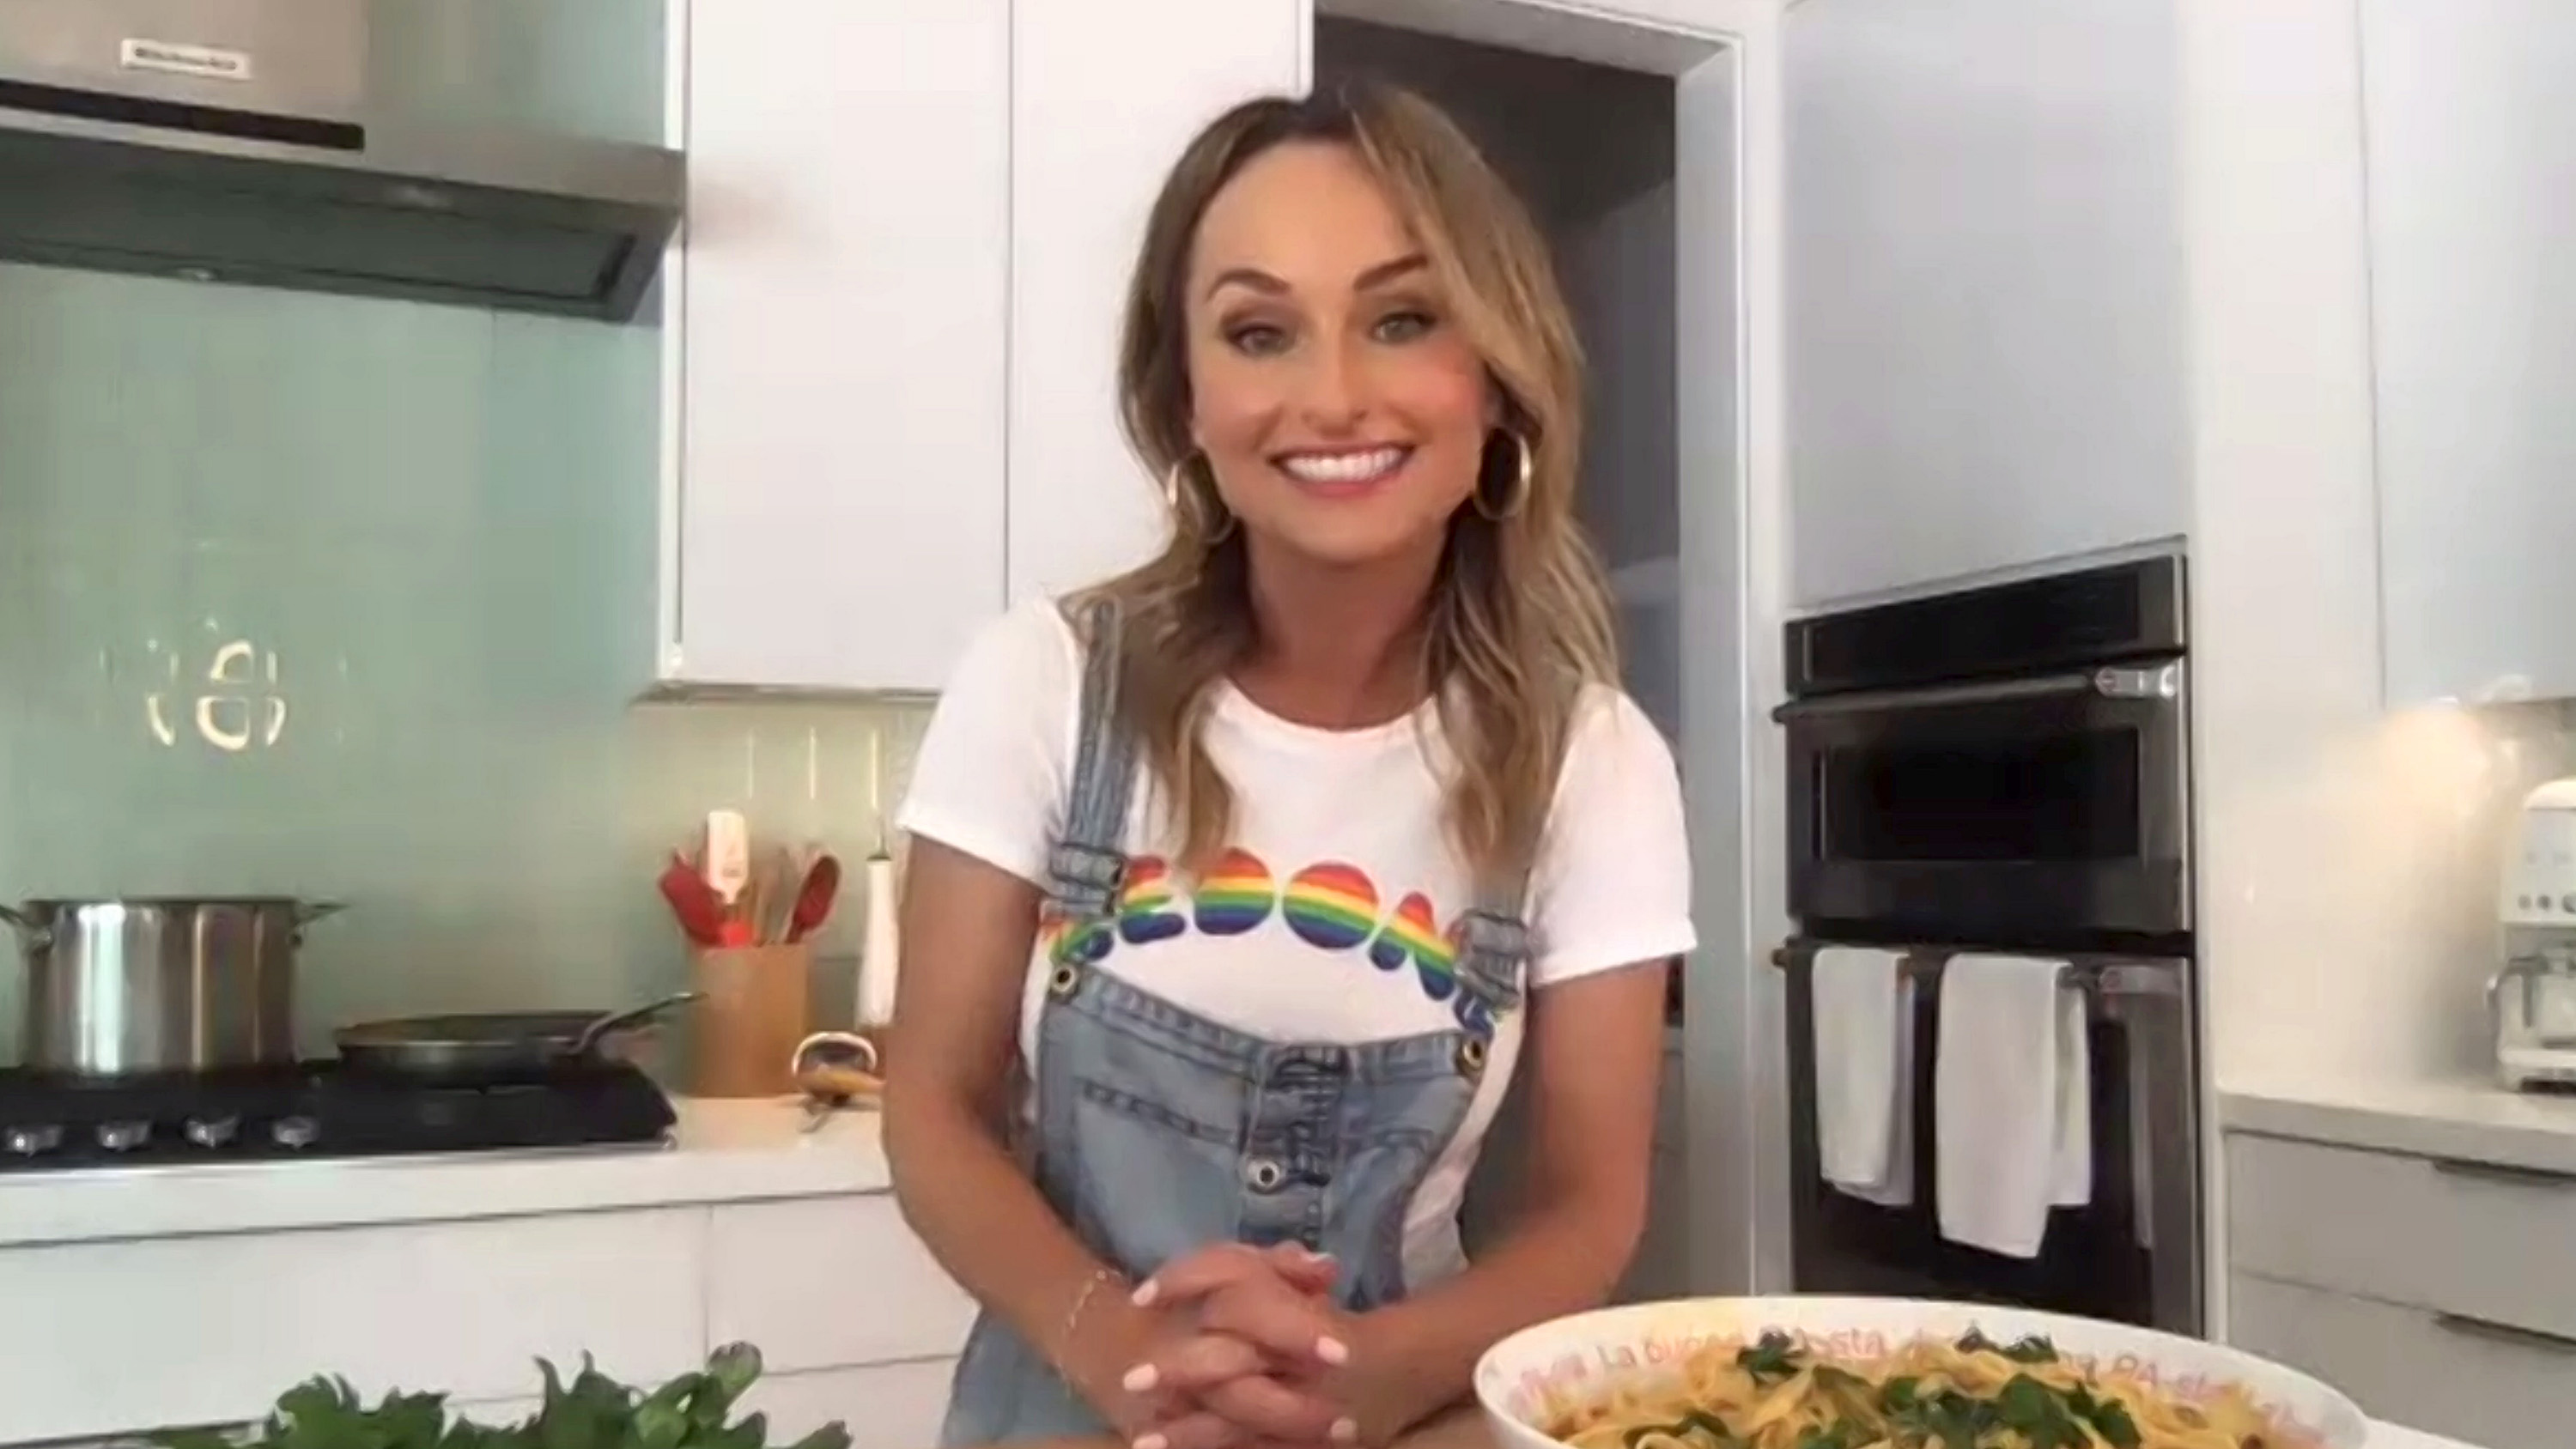 In the Kitchen with Giada De Laurentiis presented by Food Network & Cooking Channel as part of NYCWFF Goes Virtual presented by Capital One 